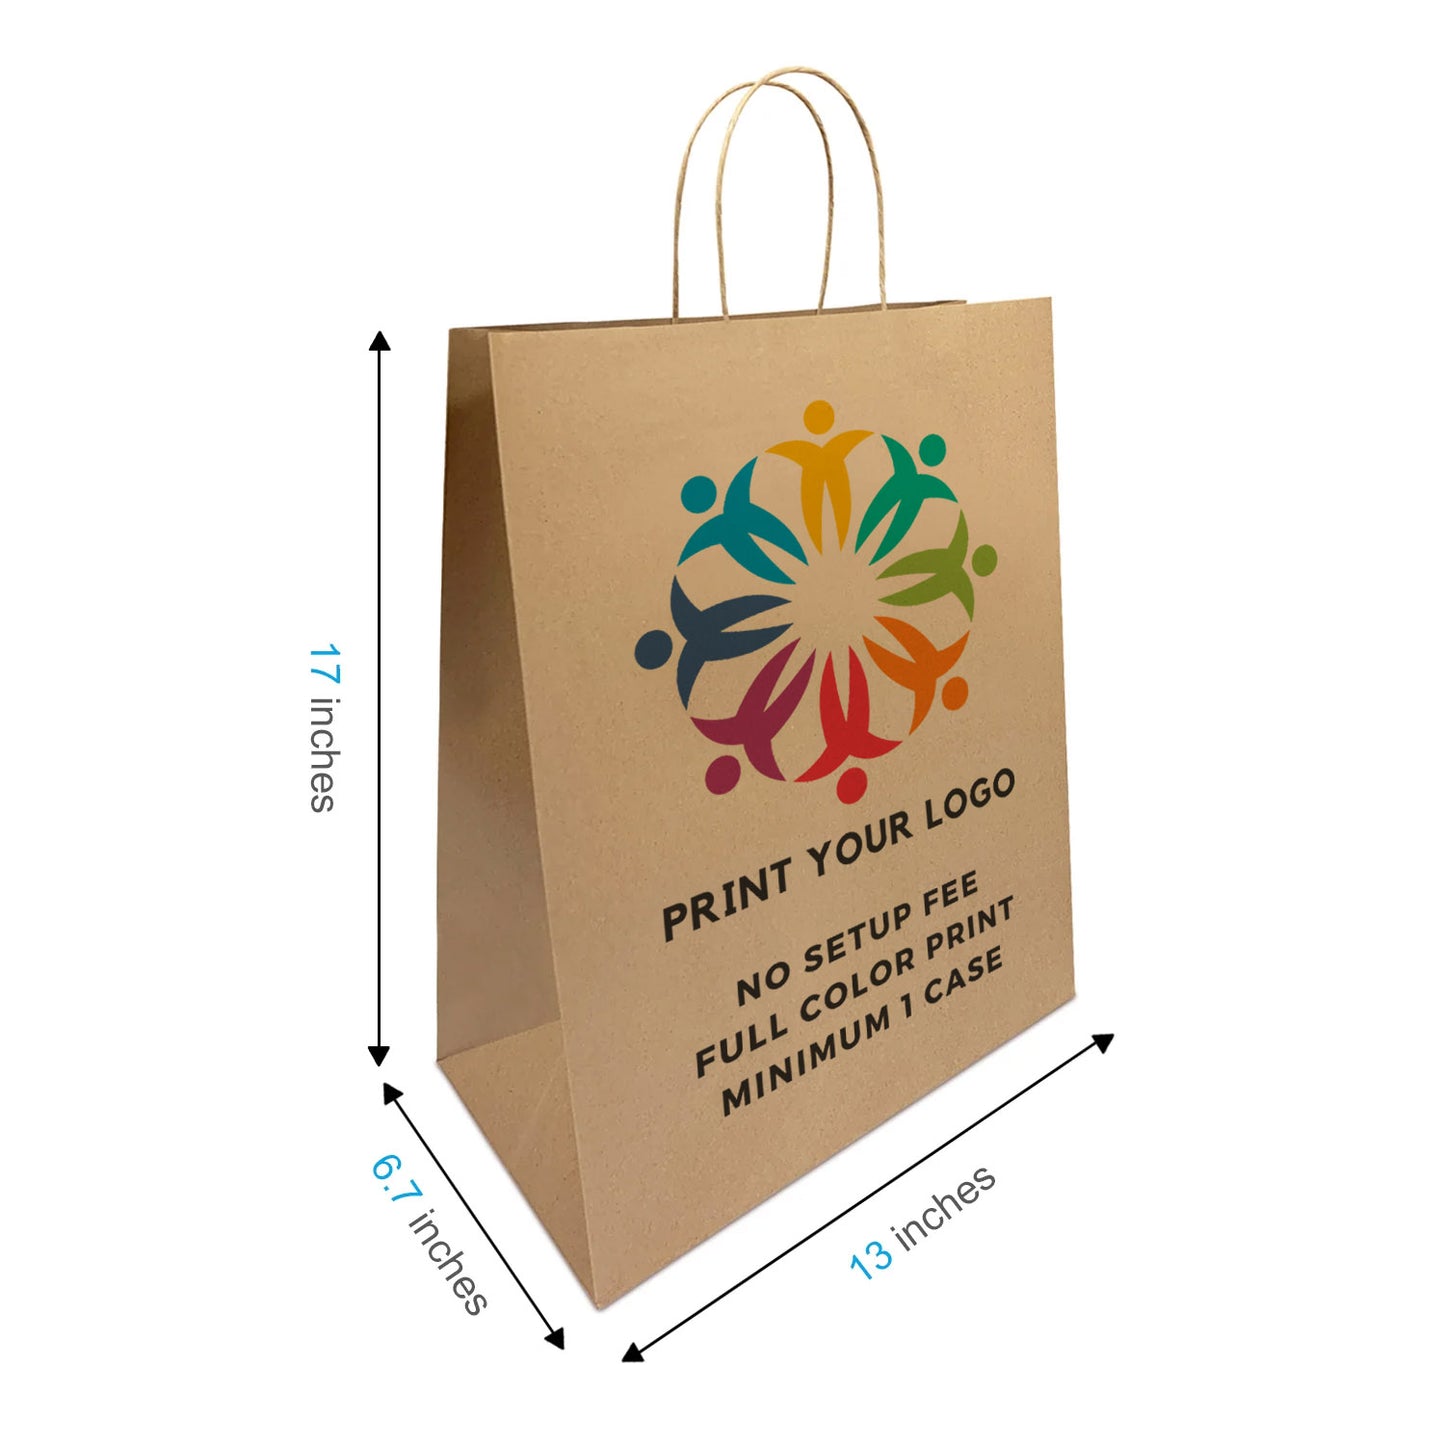 250pcs Mart 13x7x17 inches Kraft Paper Bags Twisted Handles, Full Color Print, Printed in North America